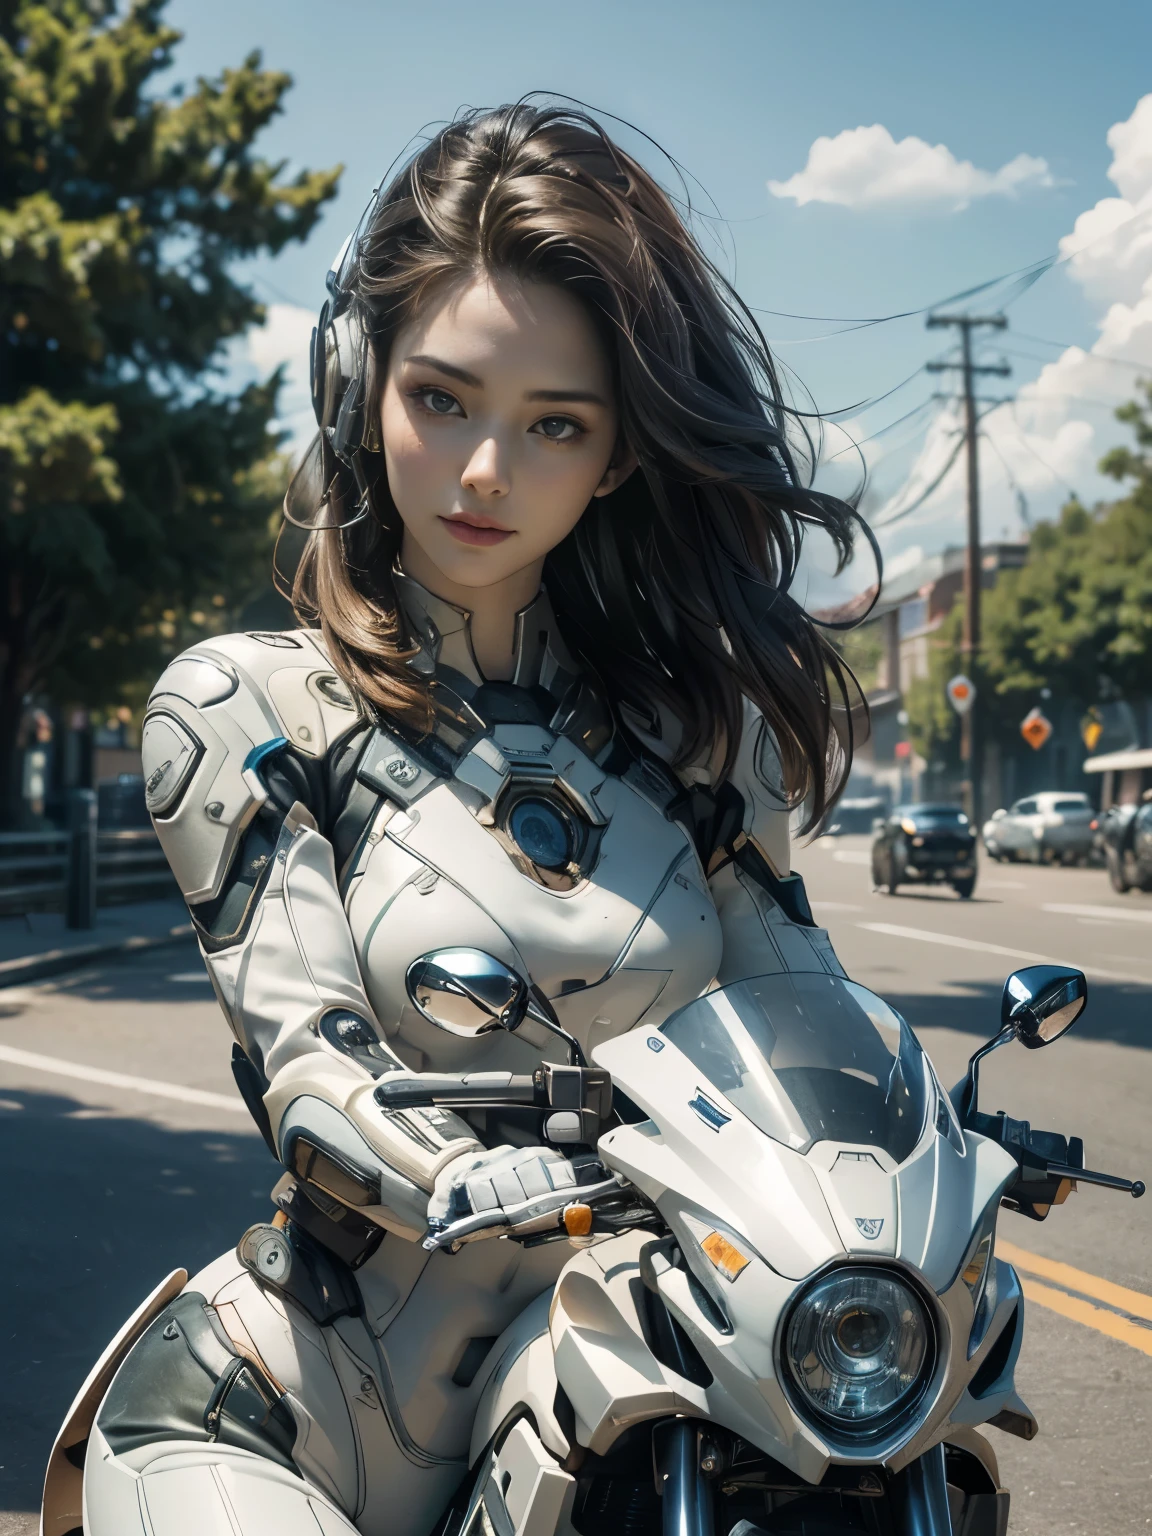 25 year old colossus style woman，(((A woman with a mechanized body))), Slime, dynamic posium: 1.3), (realistic:1.5), (realistic:1.4), 8k, Super detailed beautiful girl, 1 girl, (a sunny day:1.5), intricate body details, (short: 1.3), (highest quality: 1.0), (Super high sharpness: 1.0), (detailed hair:1.4),（Beautiful and delicate depiction of eyes）,(ride a motorcycle:1.4),unreal engine:1.4,photorealistic:1.4, skin texture:1.4, masterpiece:1.8,highest quality at best,(Wearing the communication headset、future city、white body